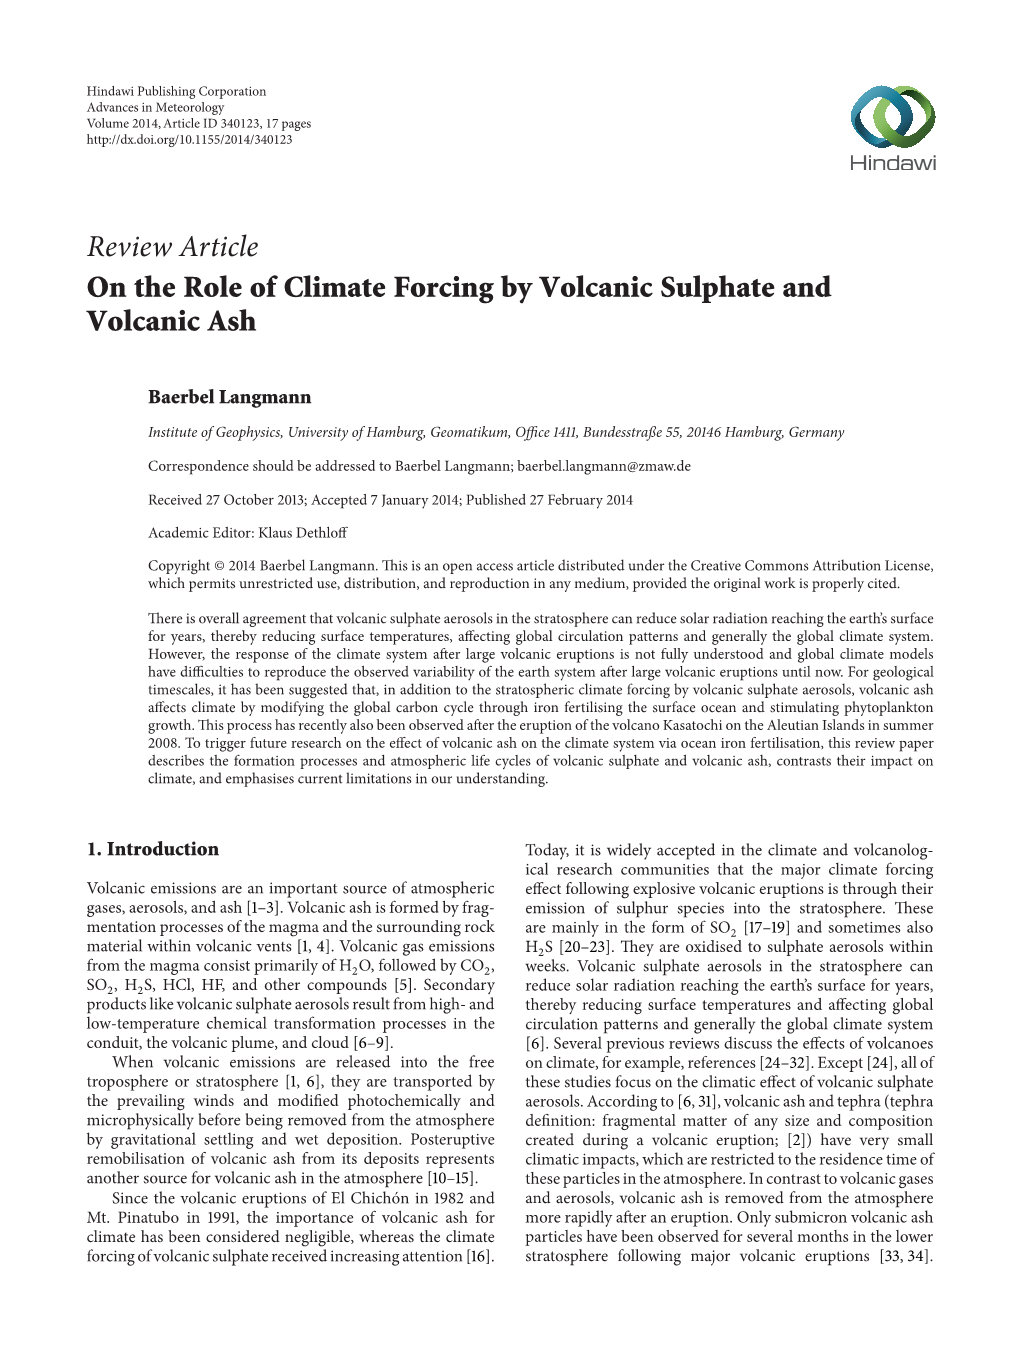 Review Article on the Role of Climate Forcing by Volcanic Sulphate and Volcanic Ash